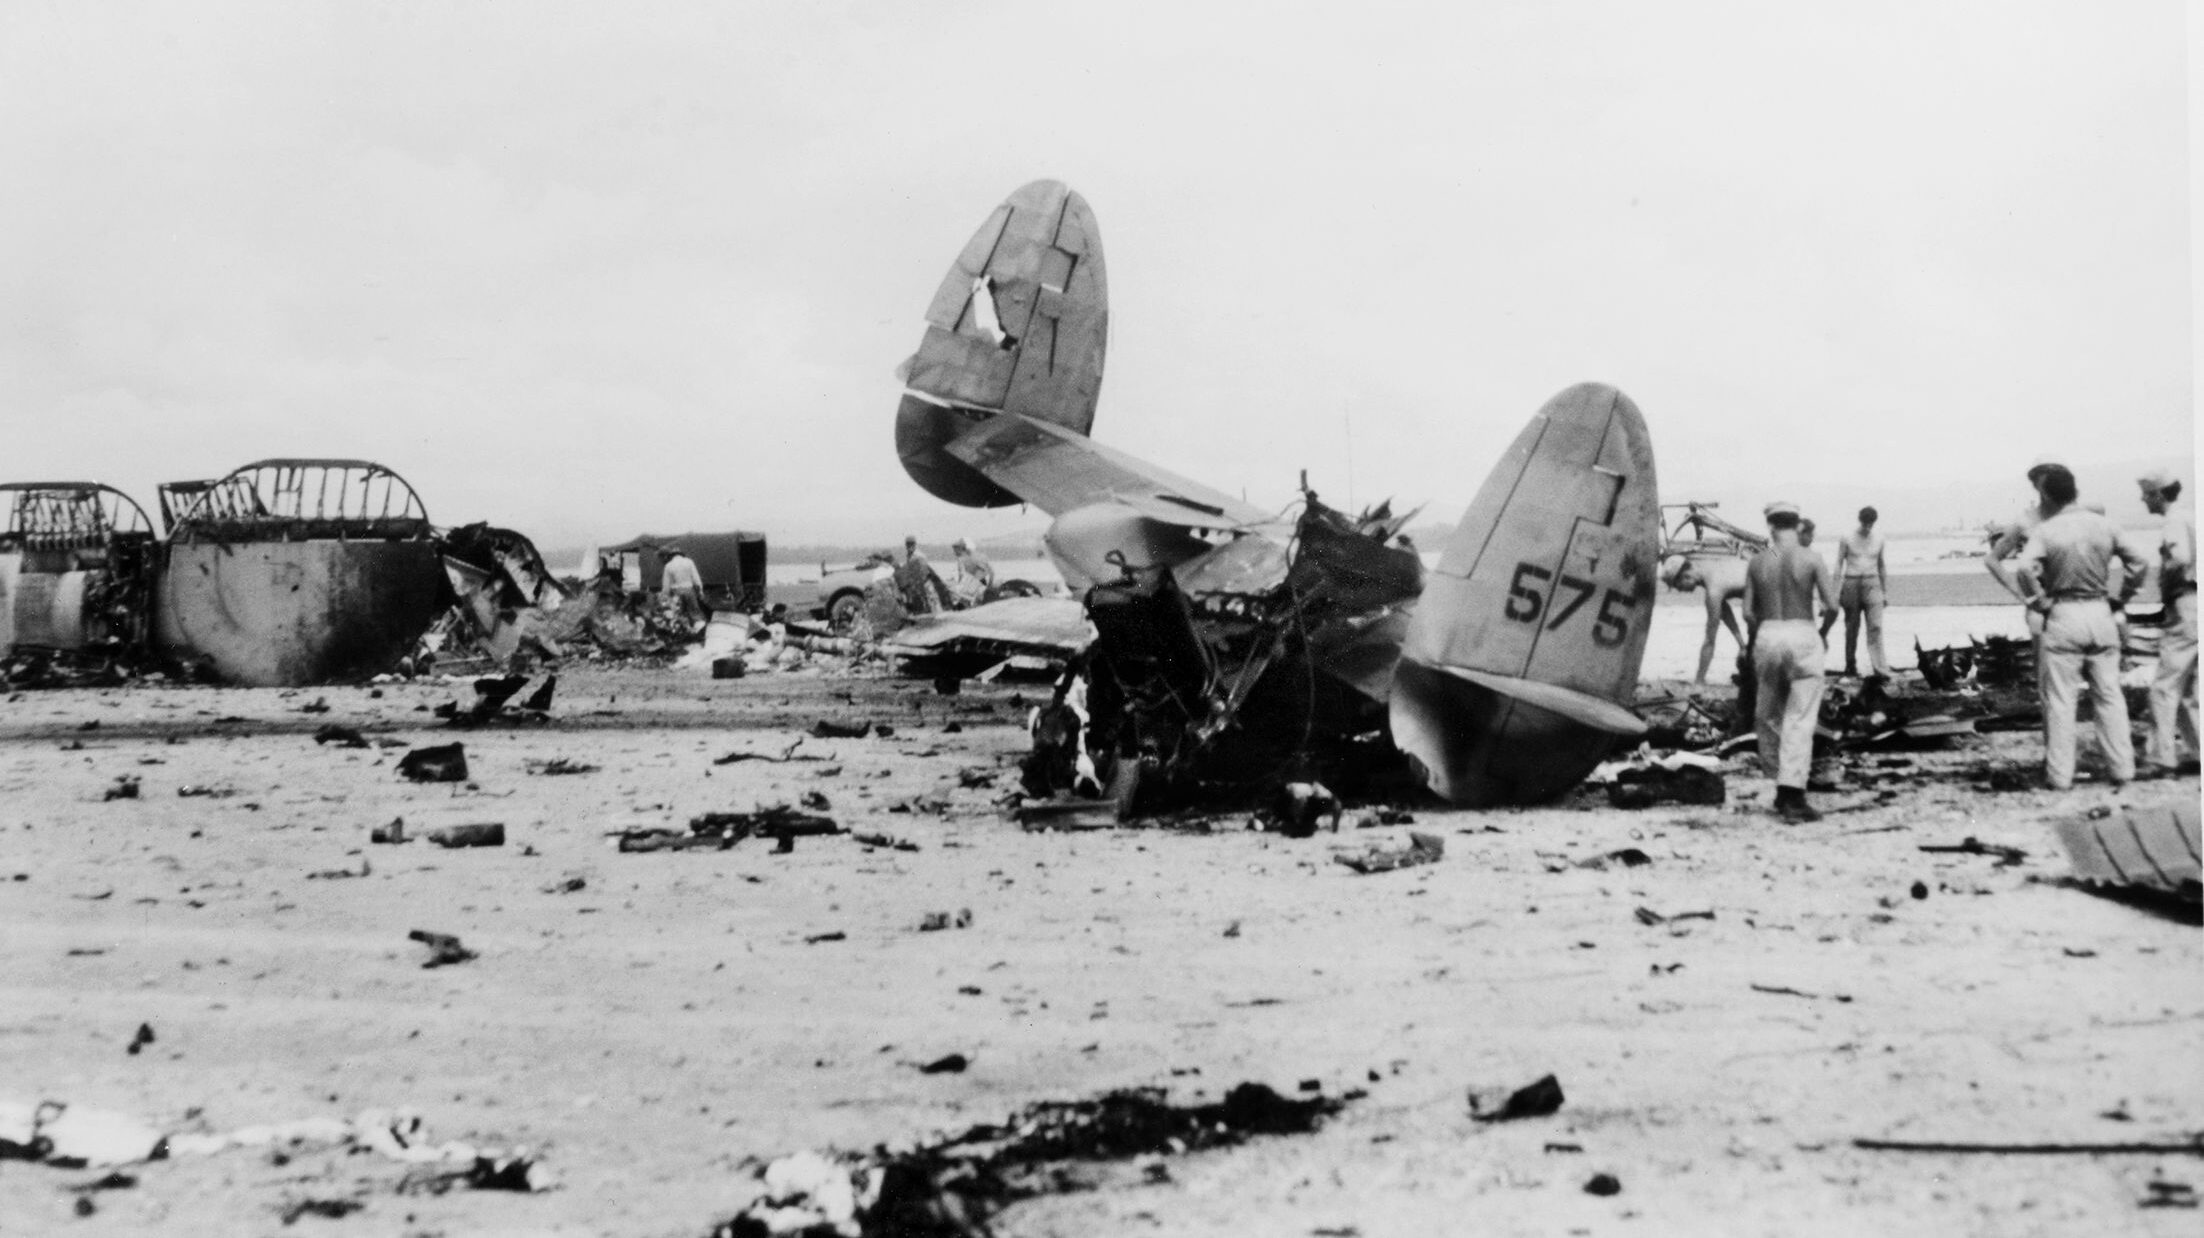 The tail section is all that is left of a Lockheed Ventura on the island of Leyte in the Philippines. This aircraft and others were victims of a Japanese raid that occurred during the final months of the war in the Pacific, probably in late 1944. 